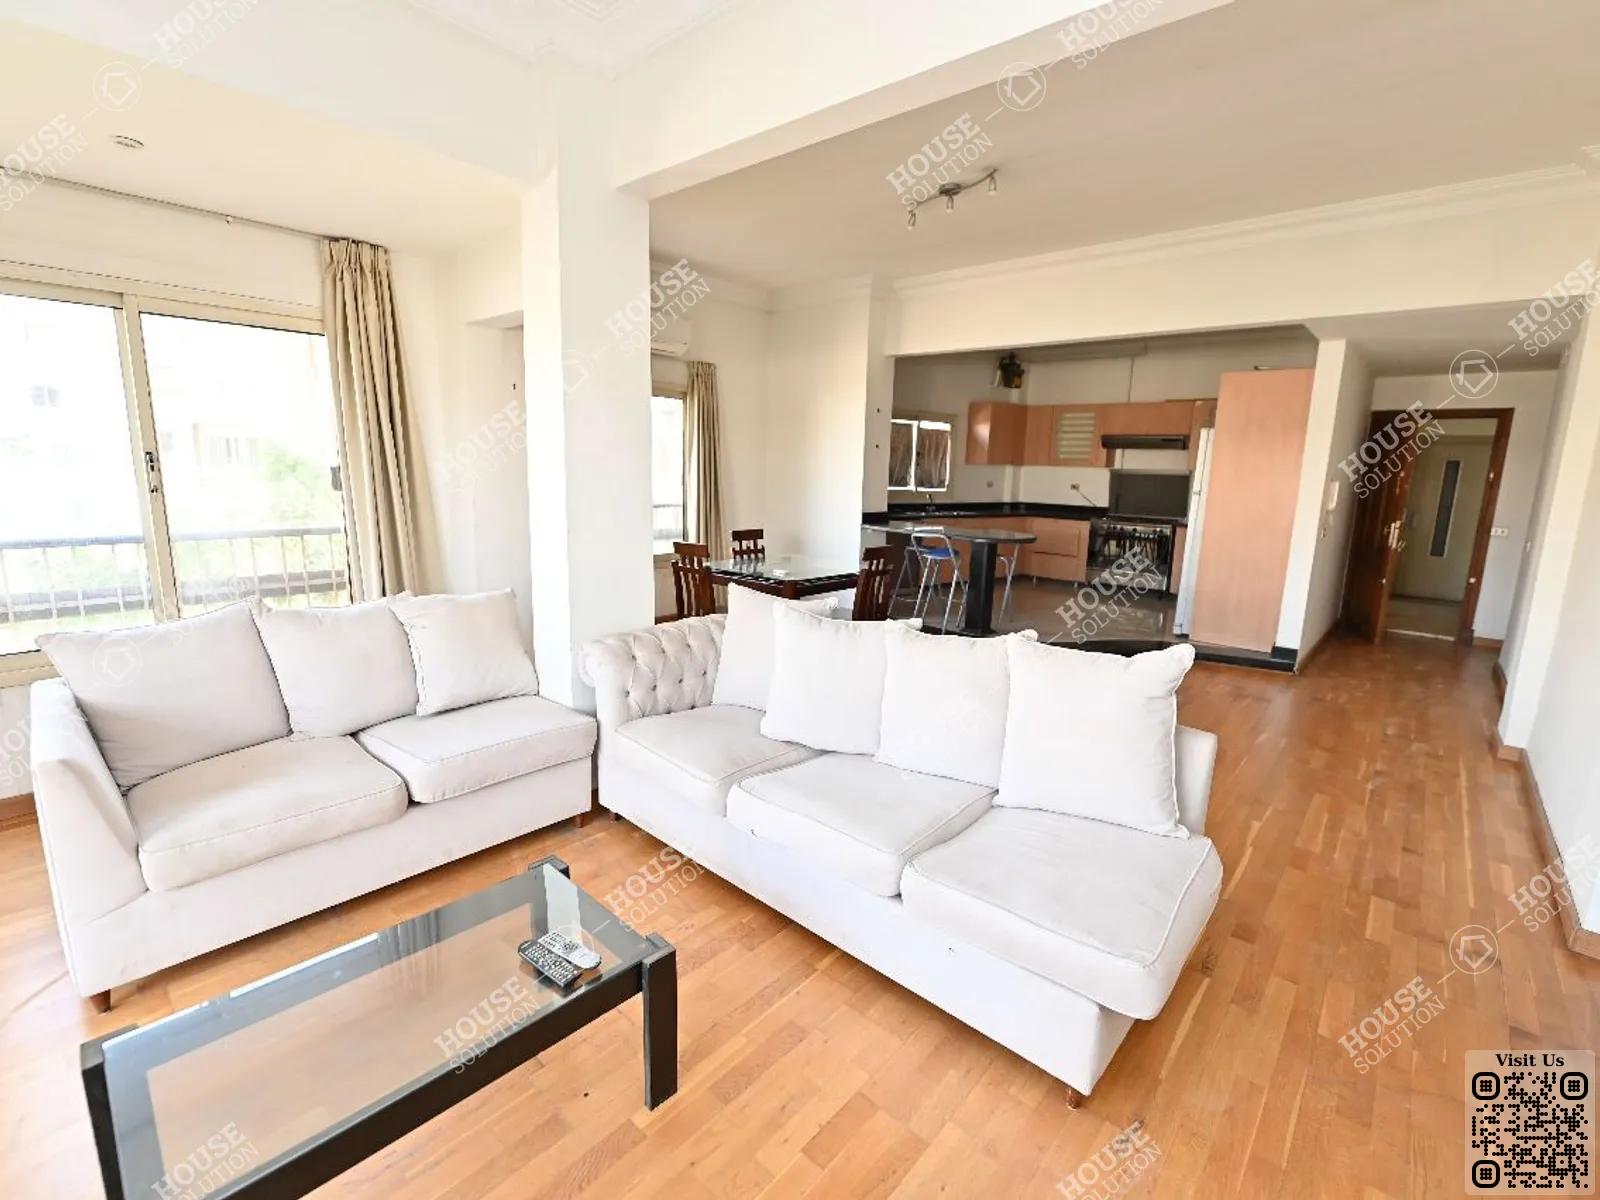 RECEPTION  @ Apartments For Rent In Maadi Maadi Degla Area: 120 m² consists of 3 Bedrooms 2 Bathrooms Modern furnished 5 stars #5619-0